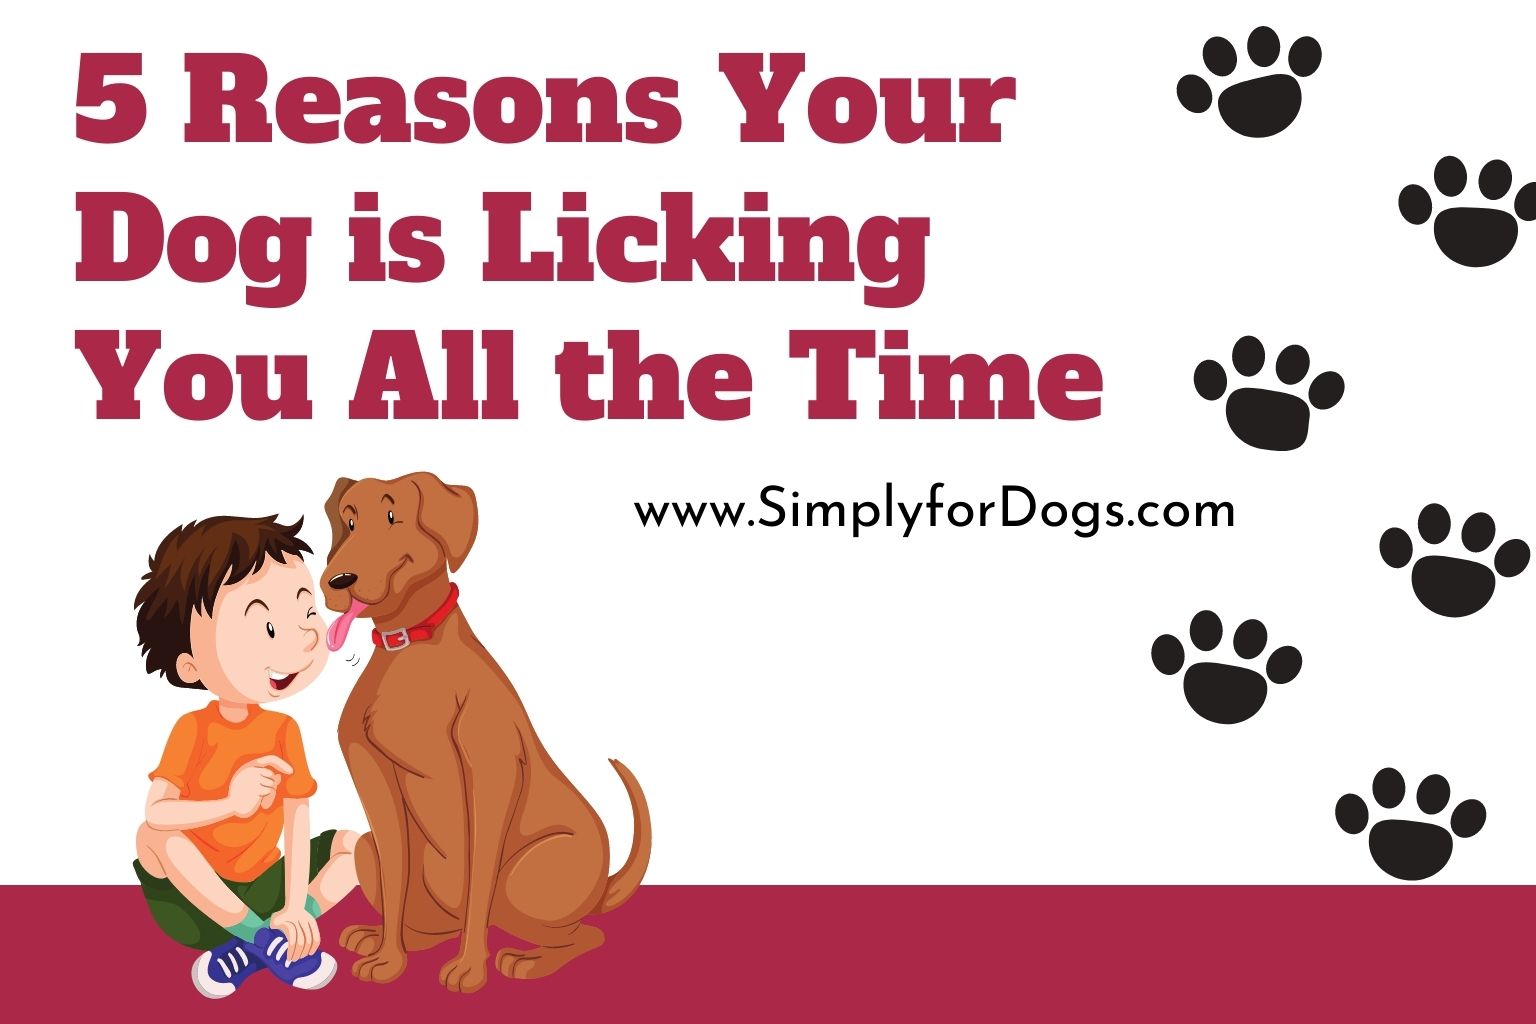 5 Reasons Your Dog is Licking You All the Time